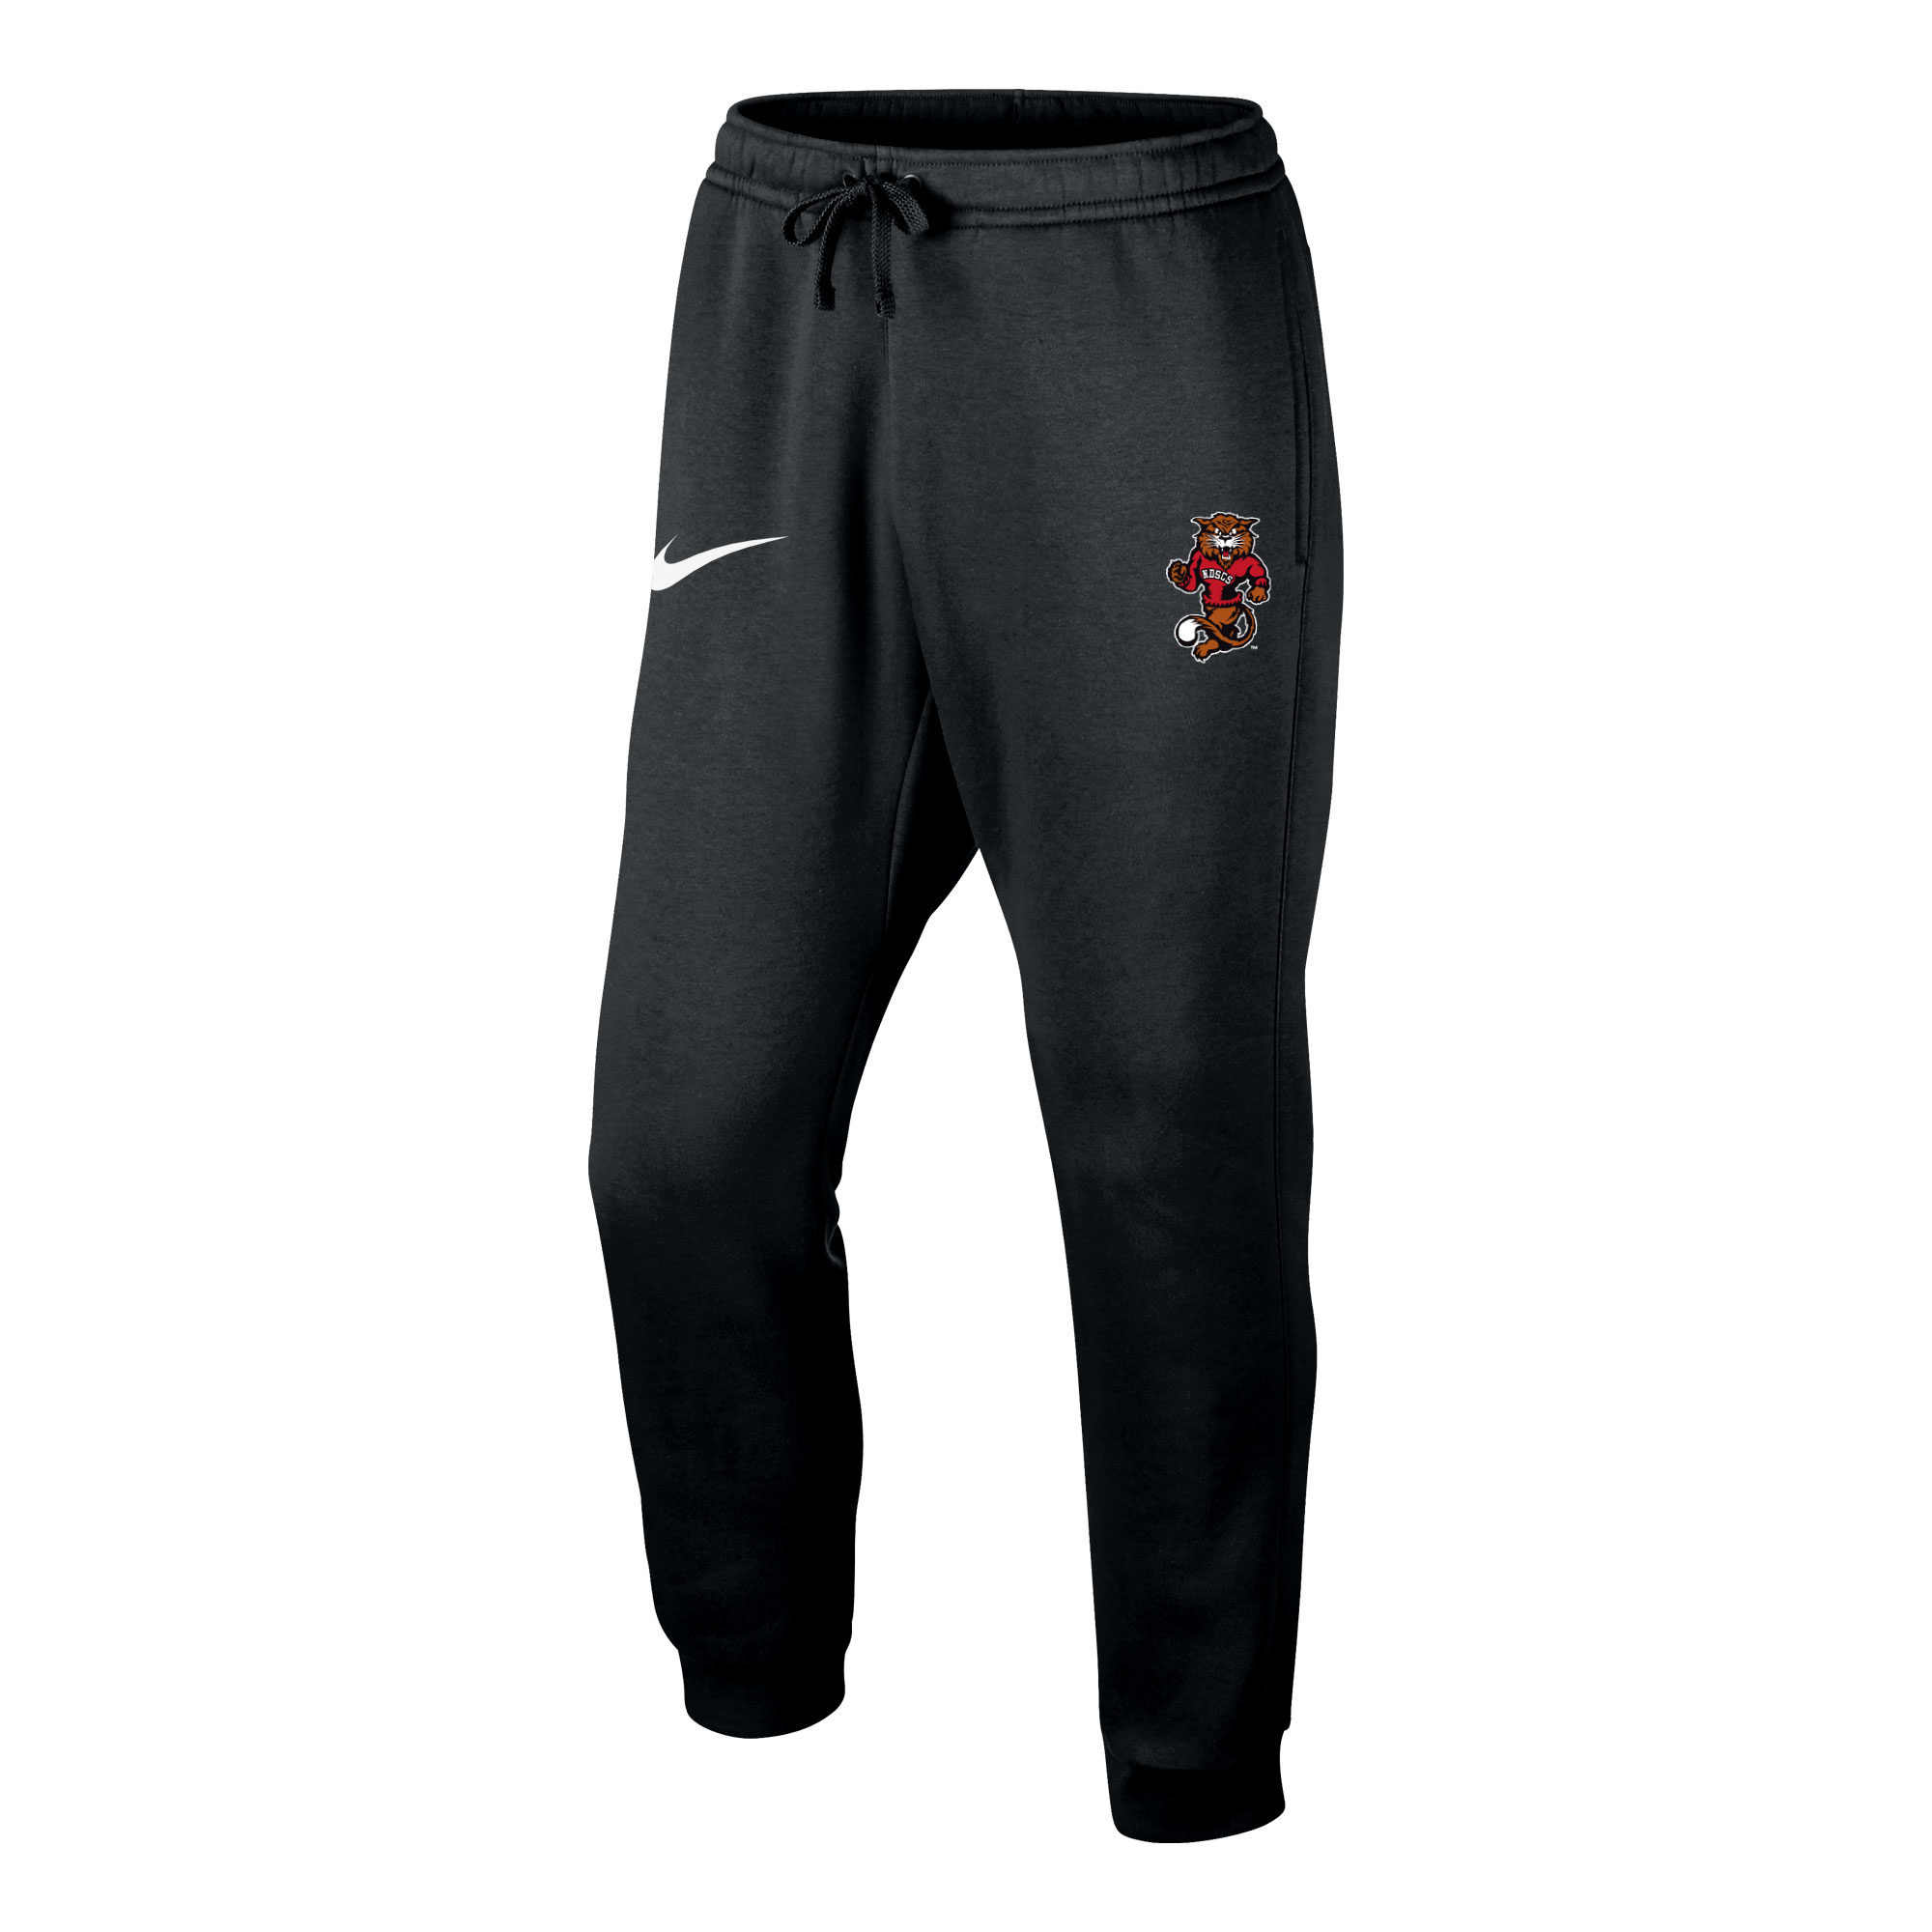 Jogger Pant - by Nike